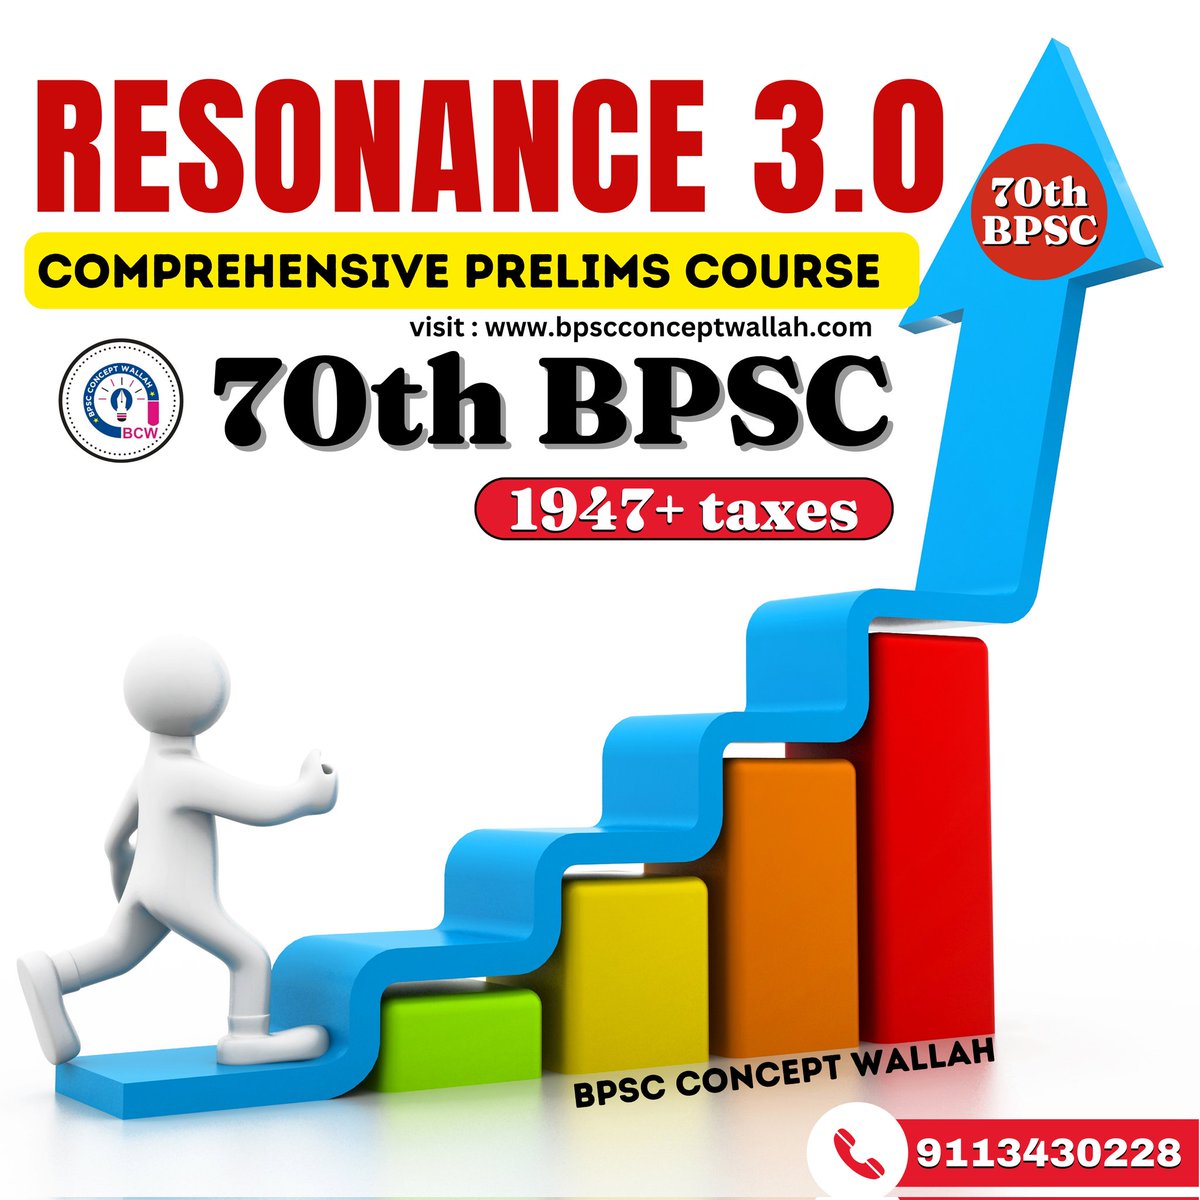 👉 70th BPSC Comprehensive Prelims Course 
👉 Link : learn.bpscconceptwallah.com/products/reson…
 #bpscconceptwallah #70thBPSC #onlinecourse #RESONANCE